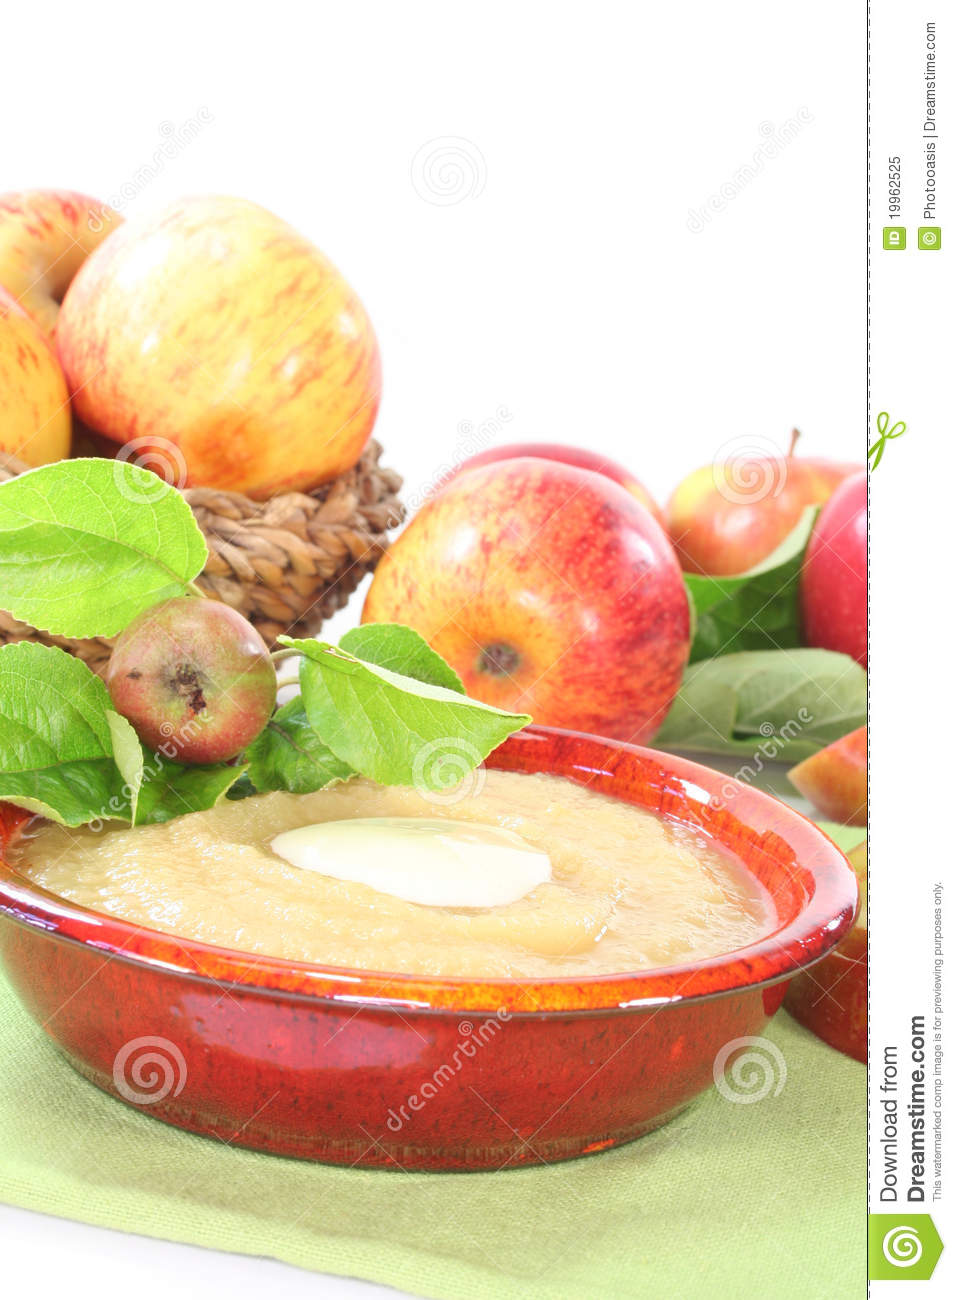 Apple Sauce With Vanilla Sauce And Fresh Apple With Leaves On A White